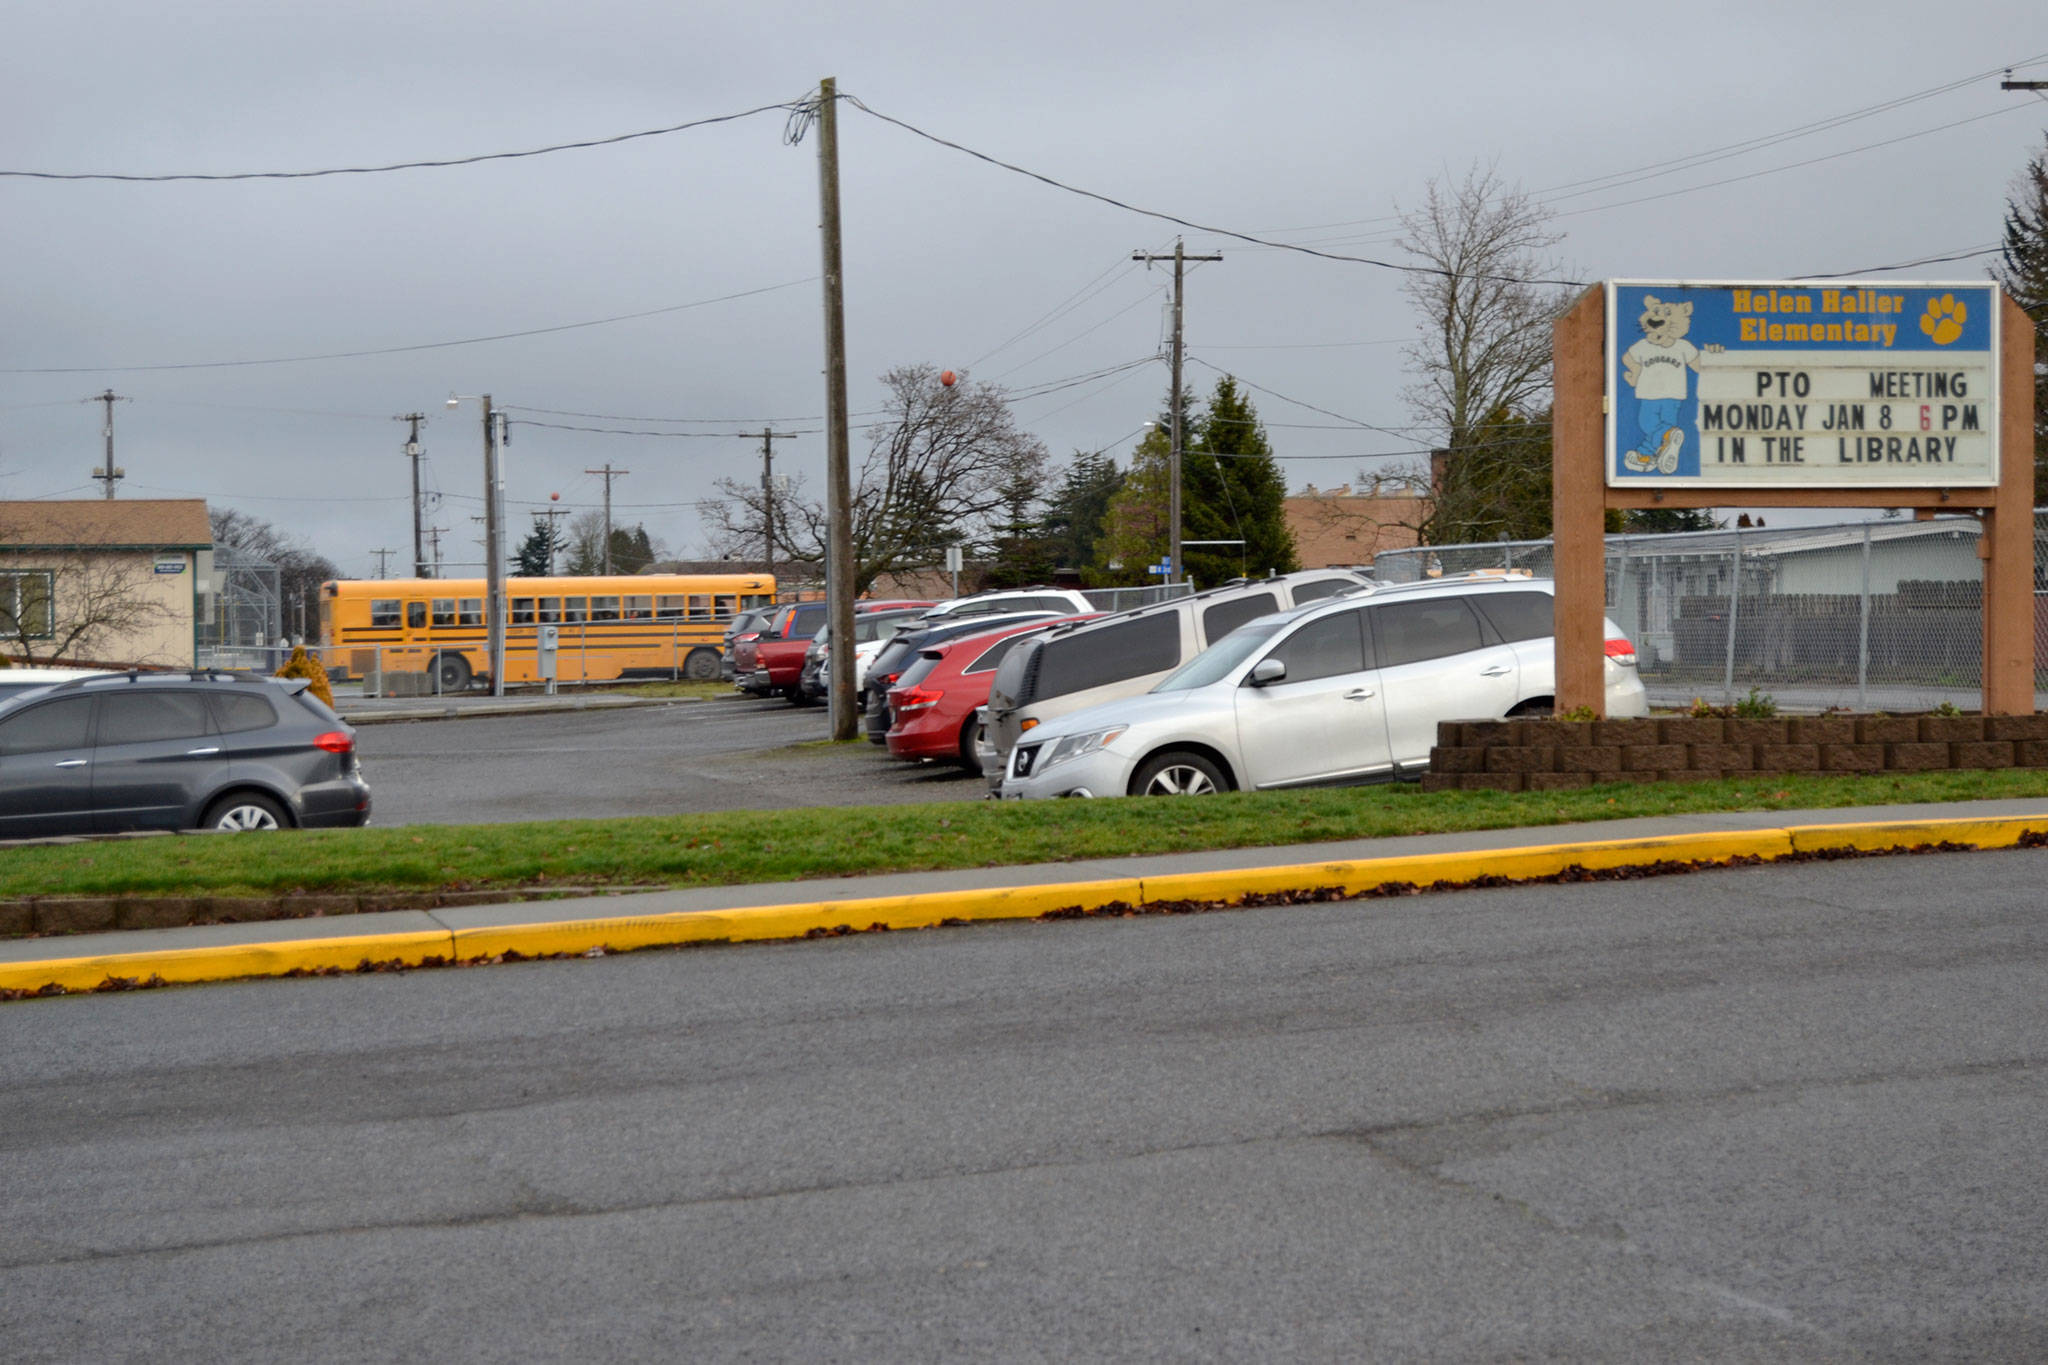 Part of the plan for redoing Fir Street includes making this east parking lot at Helen Haller Elementary a one-way road into the main parking lot. Staff with the City of Sequim said it won’t takeaway parking lots though. Sequim Gazette photo by Matthew Nash